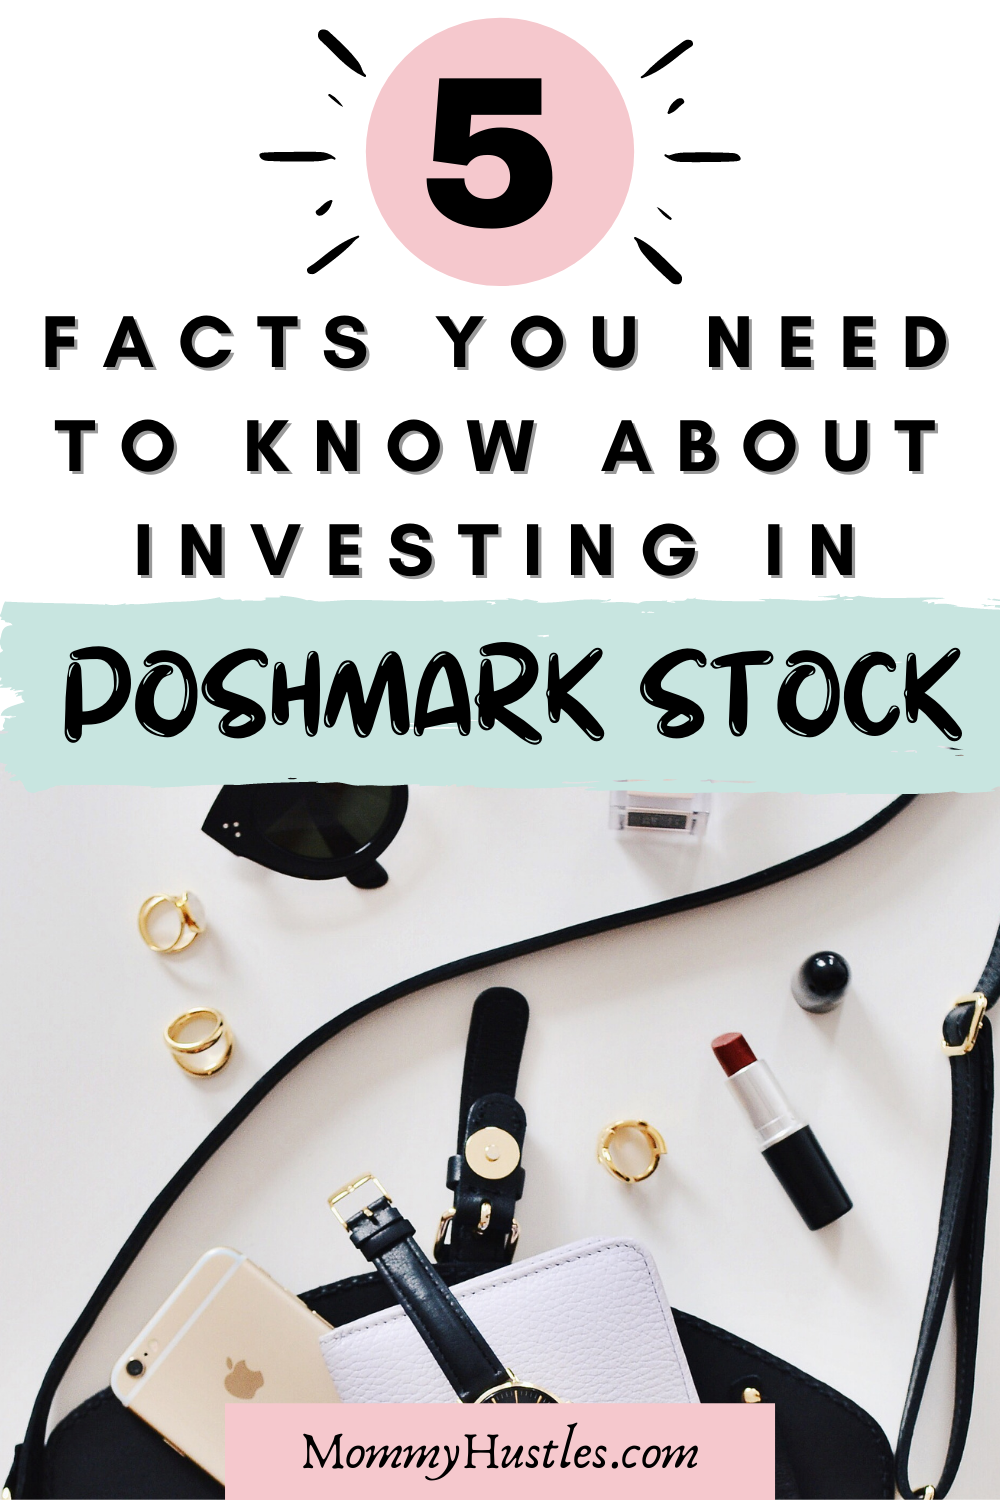 5 Facts You Need To Know About Poshmark Stock, Their IPO Filing & How You Can Invest in 2021